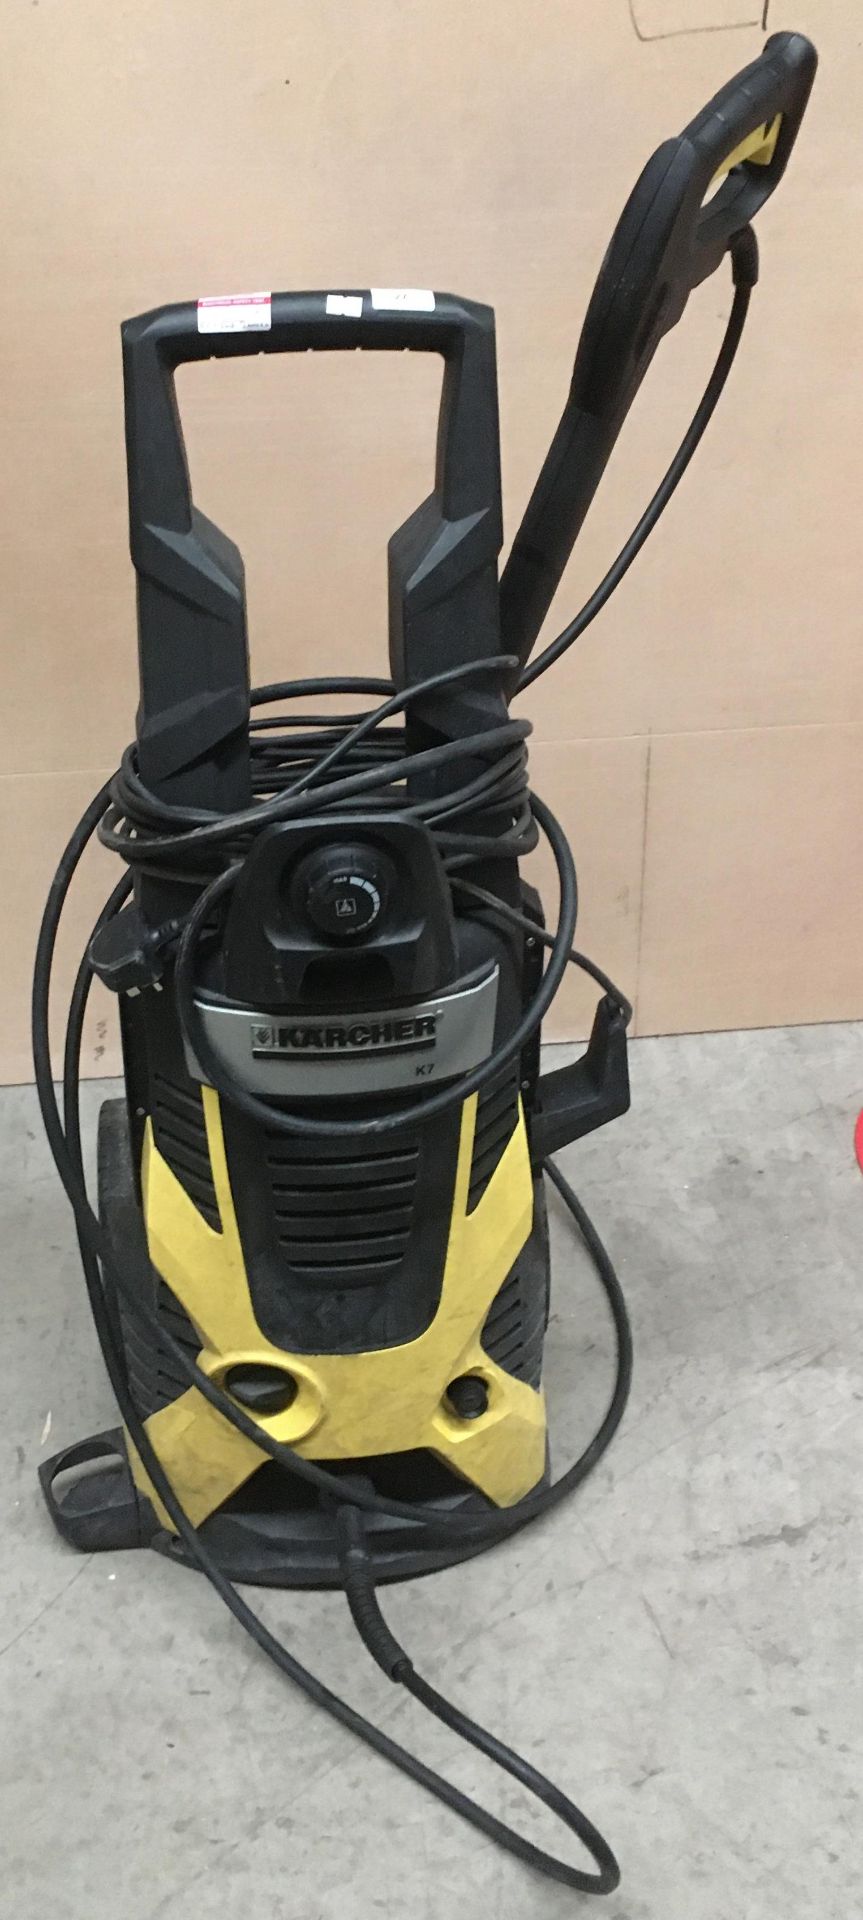 A K'Archer K7 mobile pressure washer complete with lance - please note,